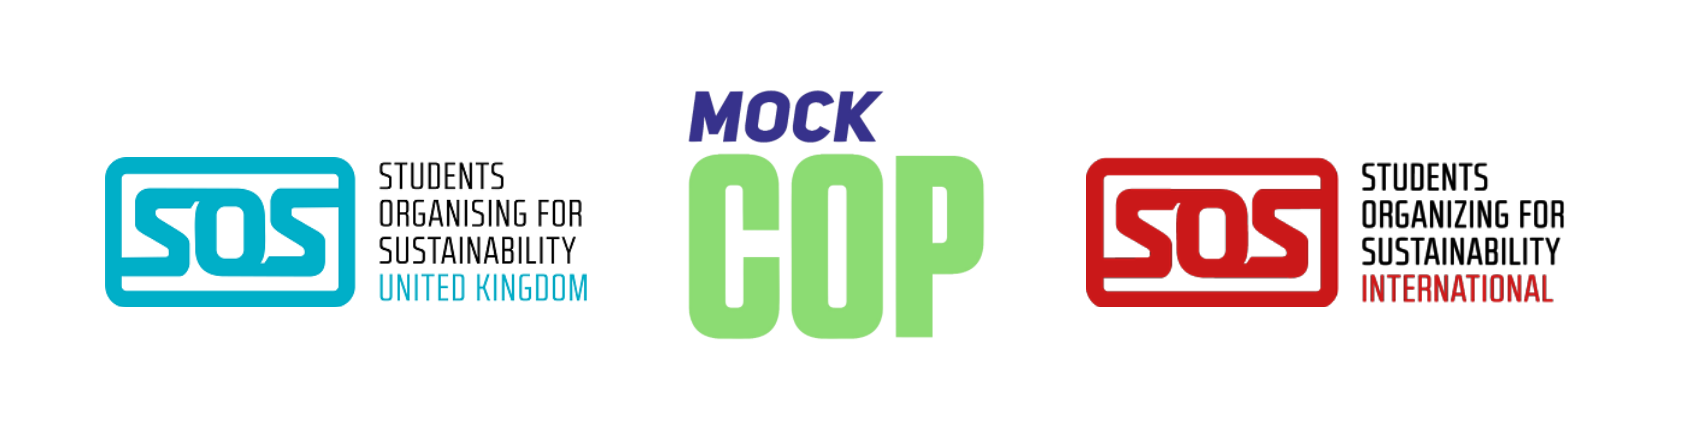 MOCK COP was born out of the NUS's Students Organising for Sustainability